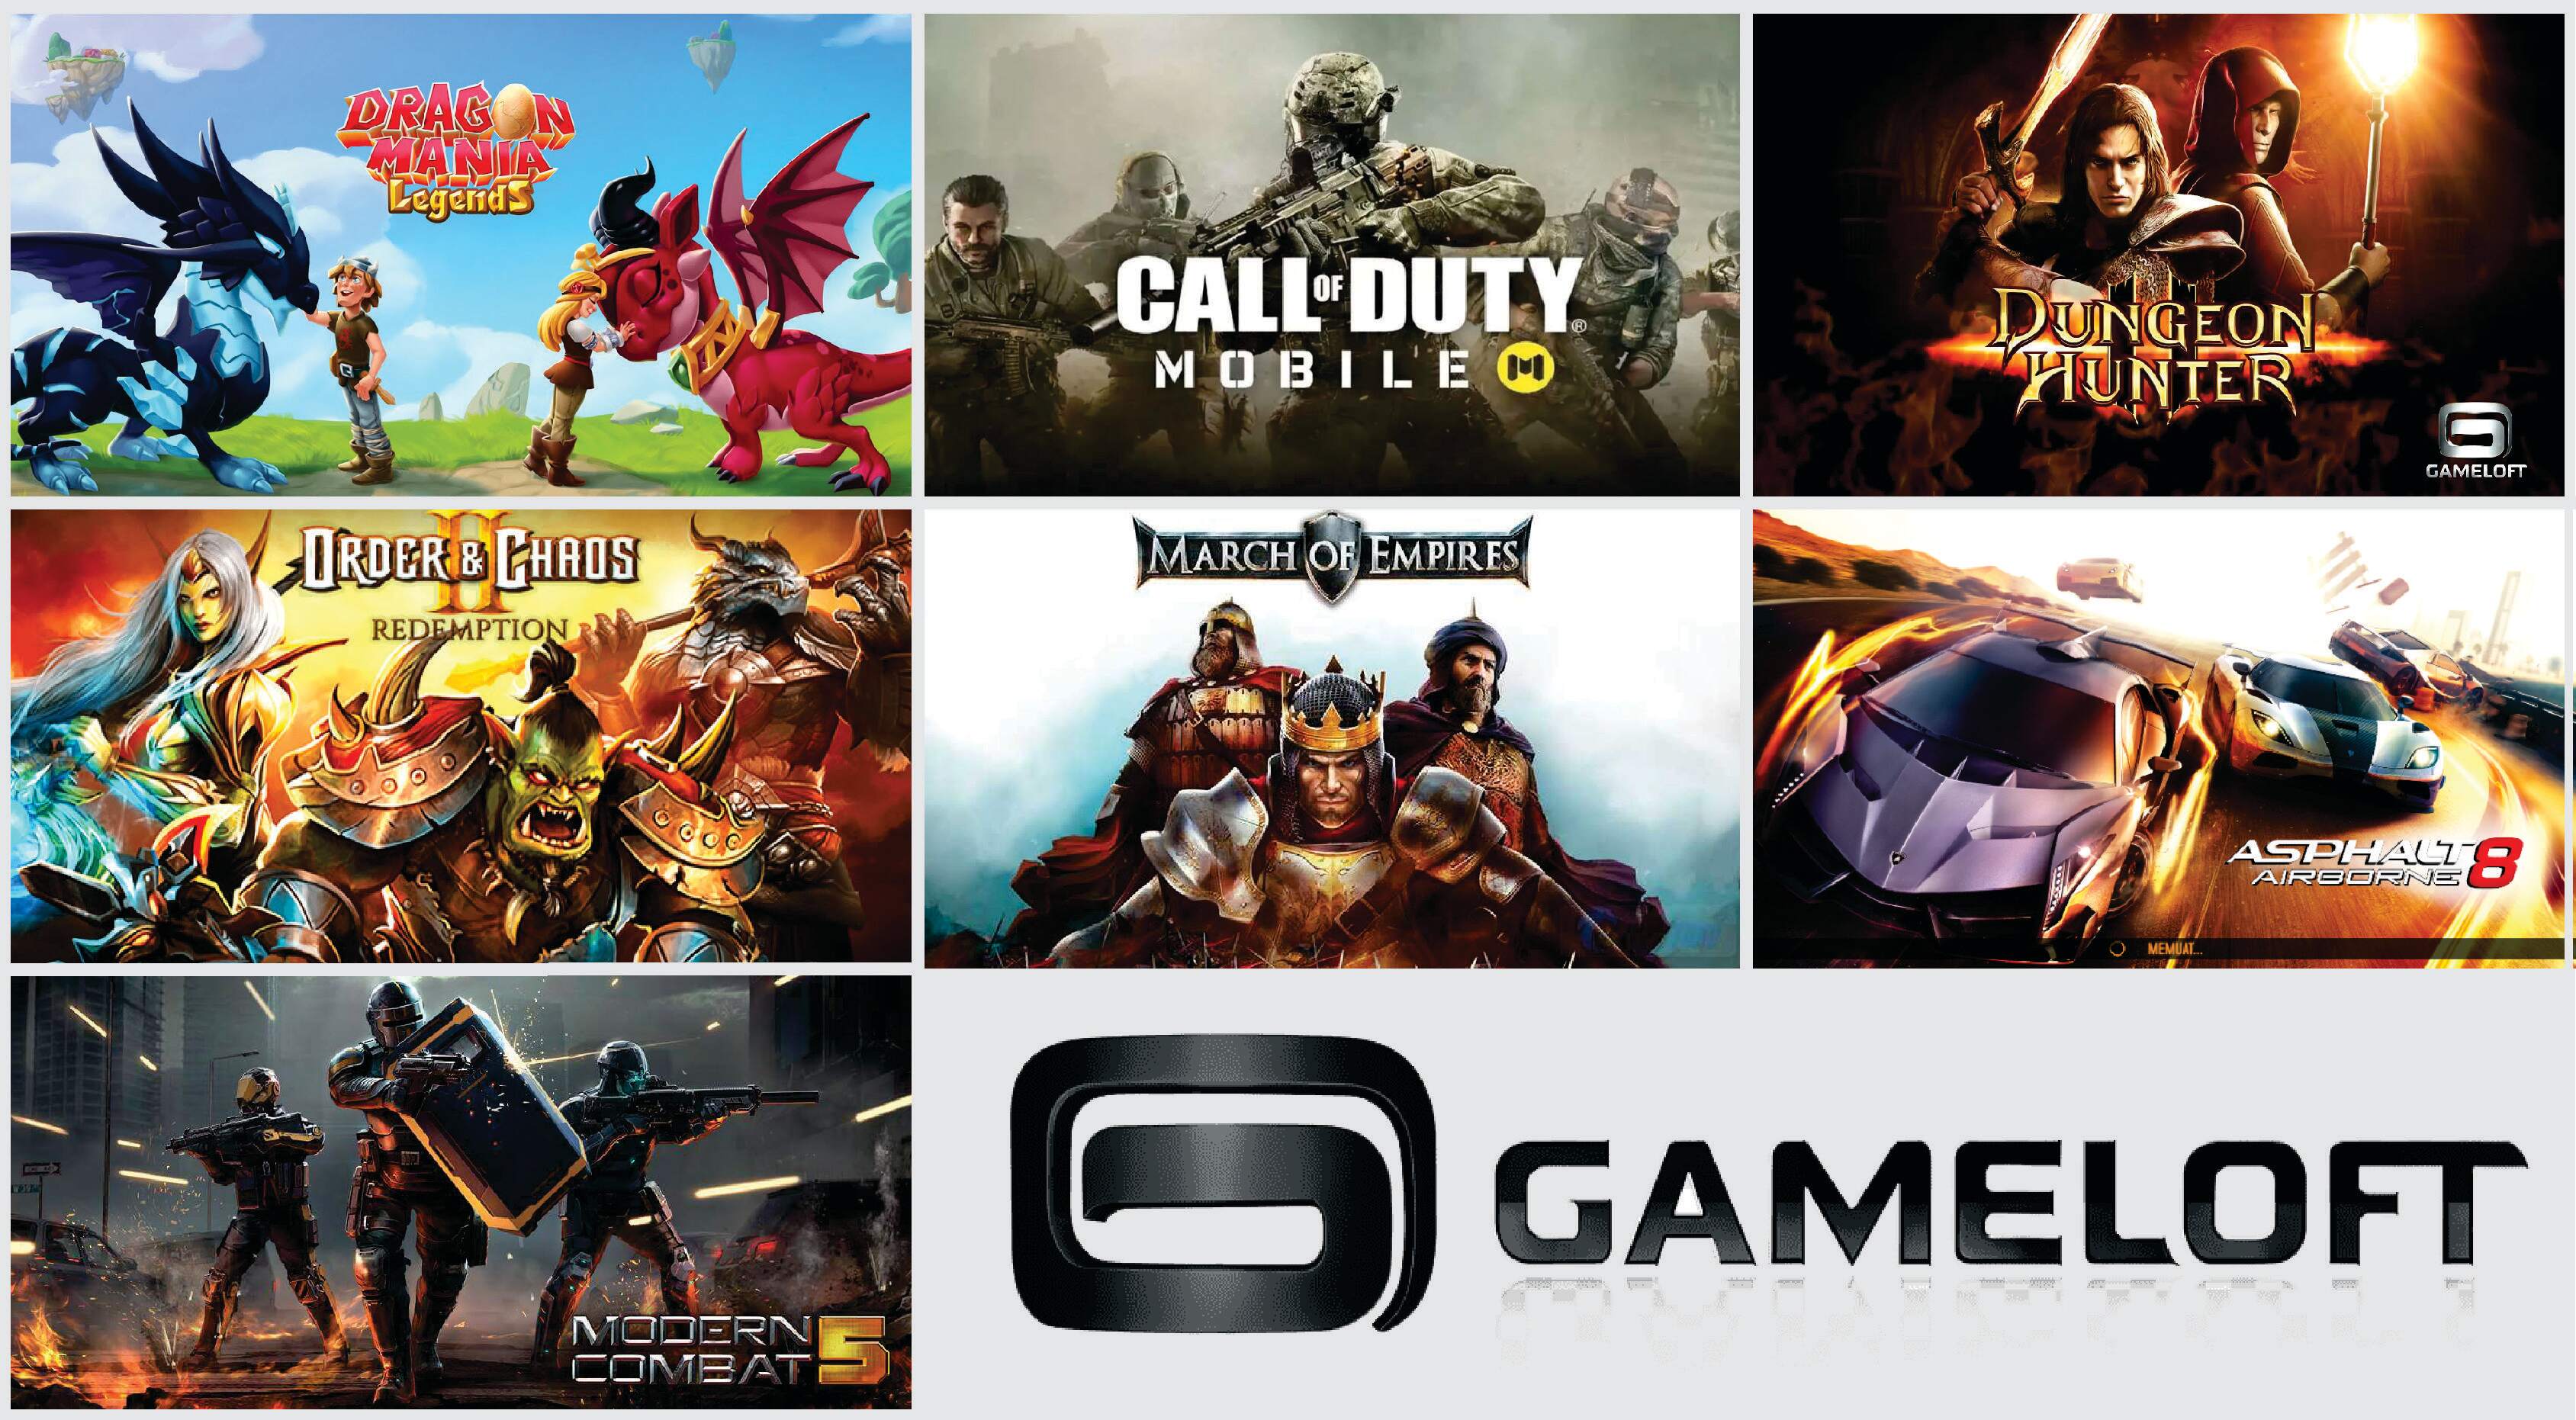 Gameloft Games: The Best in Mobile Gaming